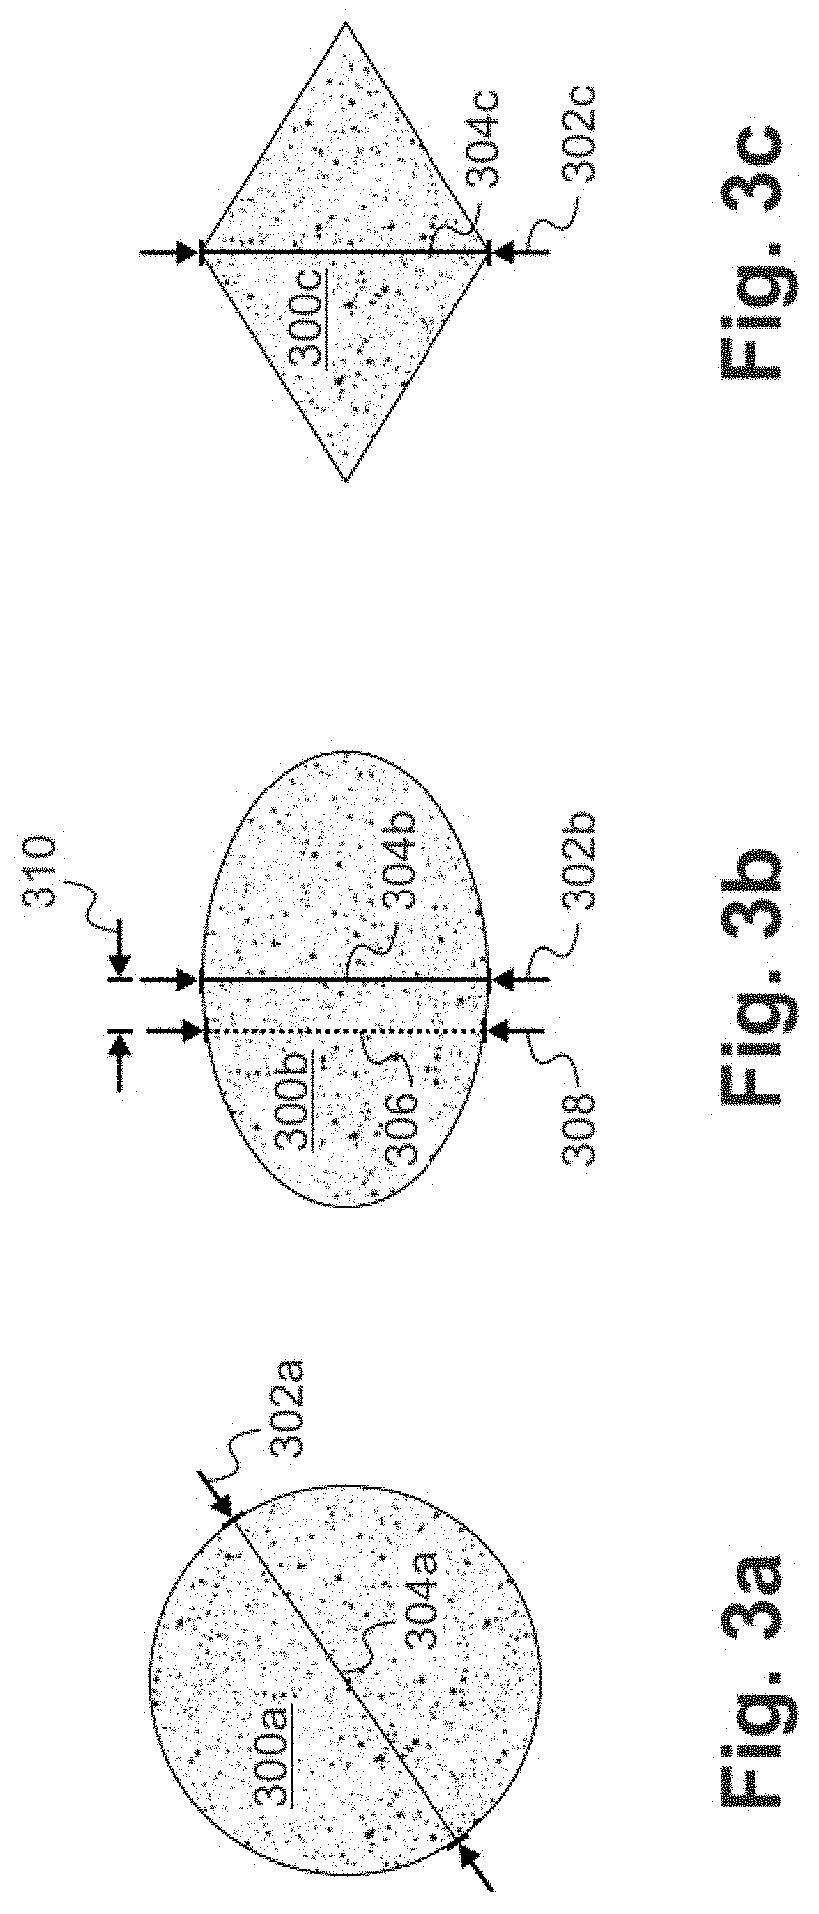 Field effect transistor with a negative capacitance gate structure